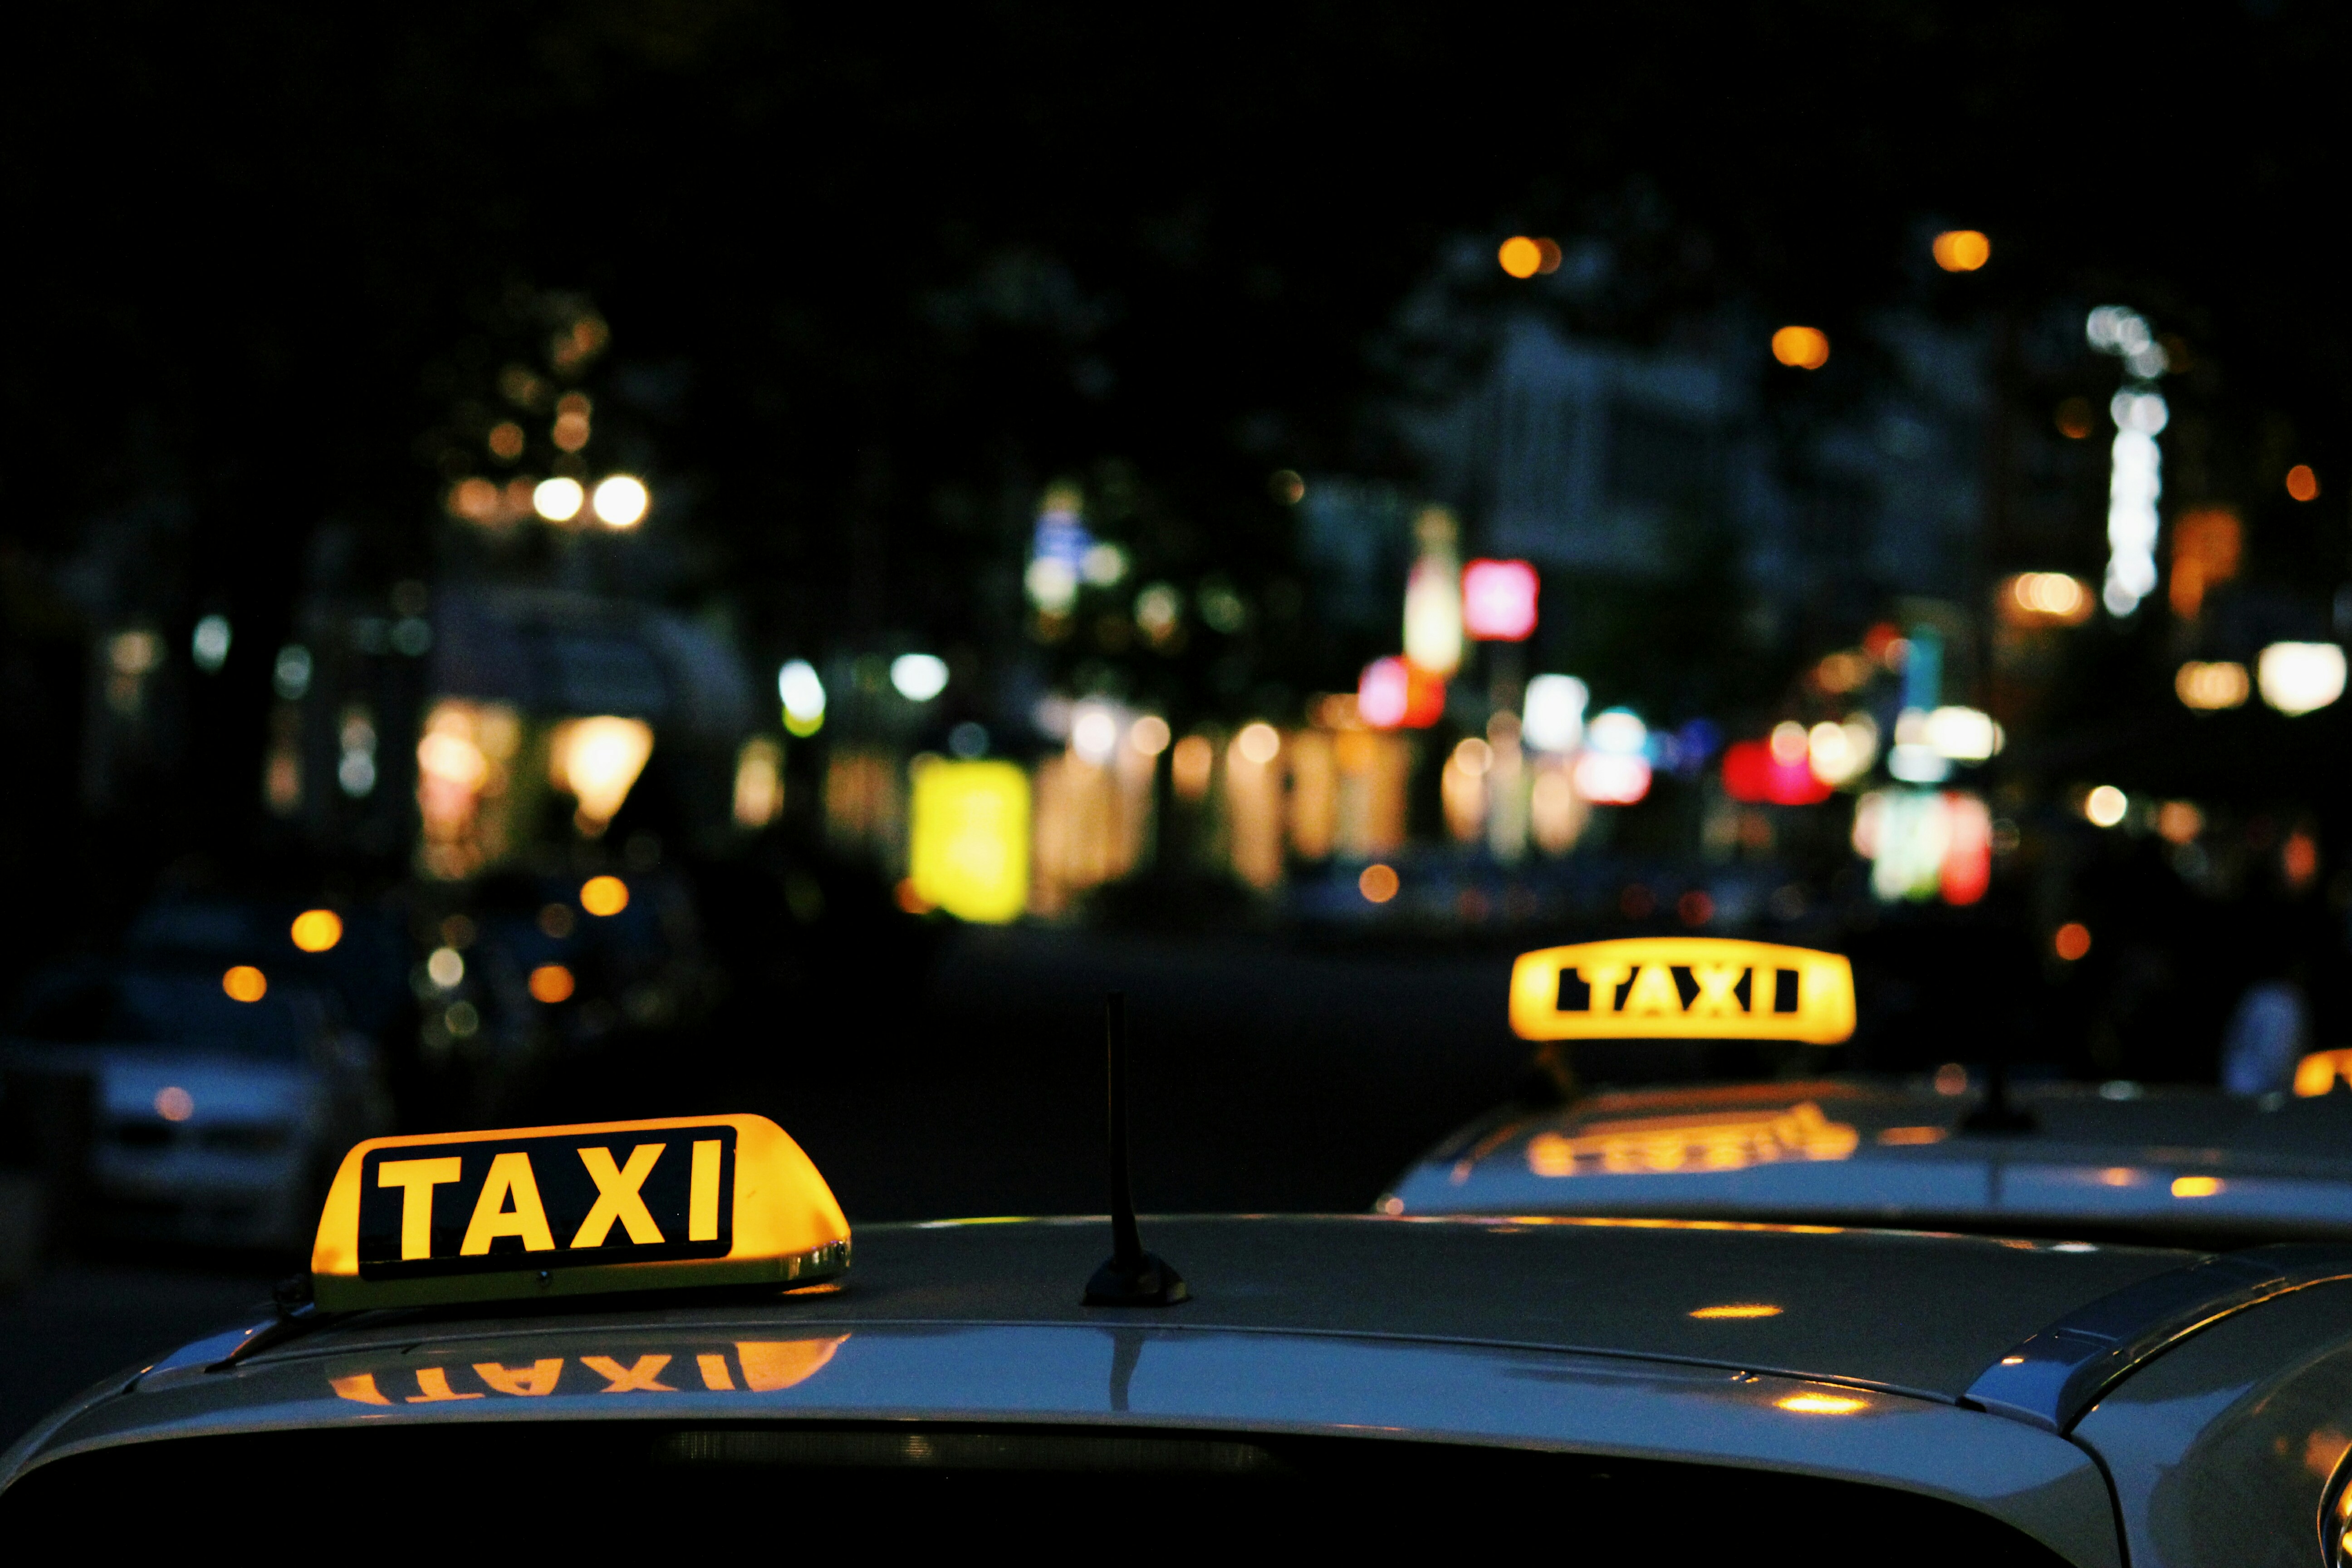 shallow focus photography of Taxi signage